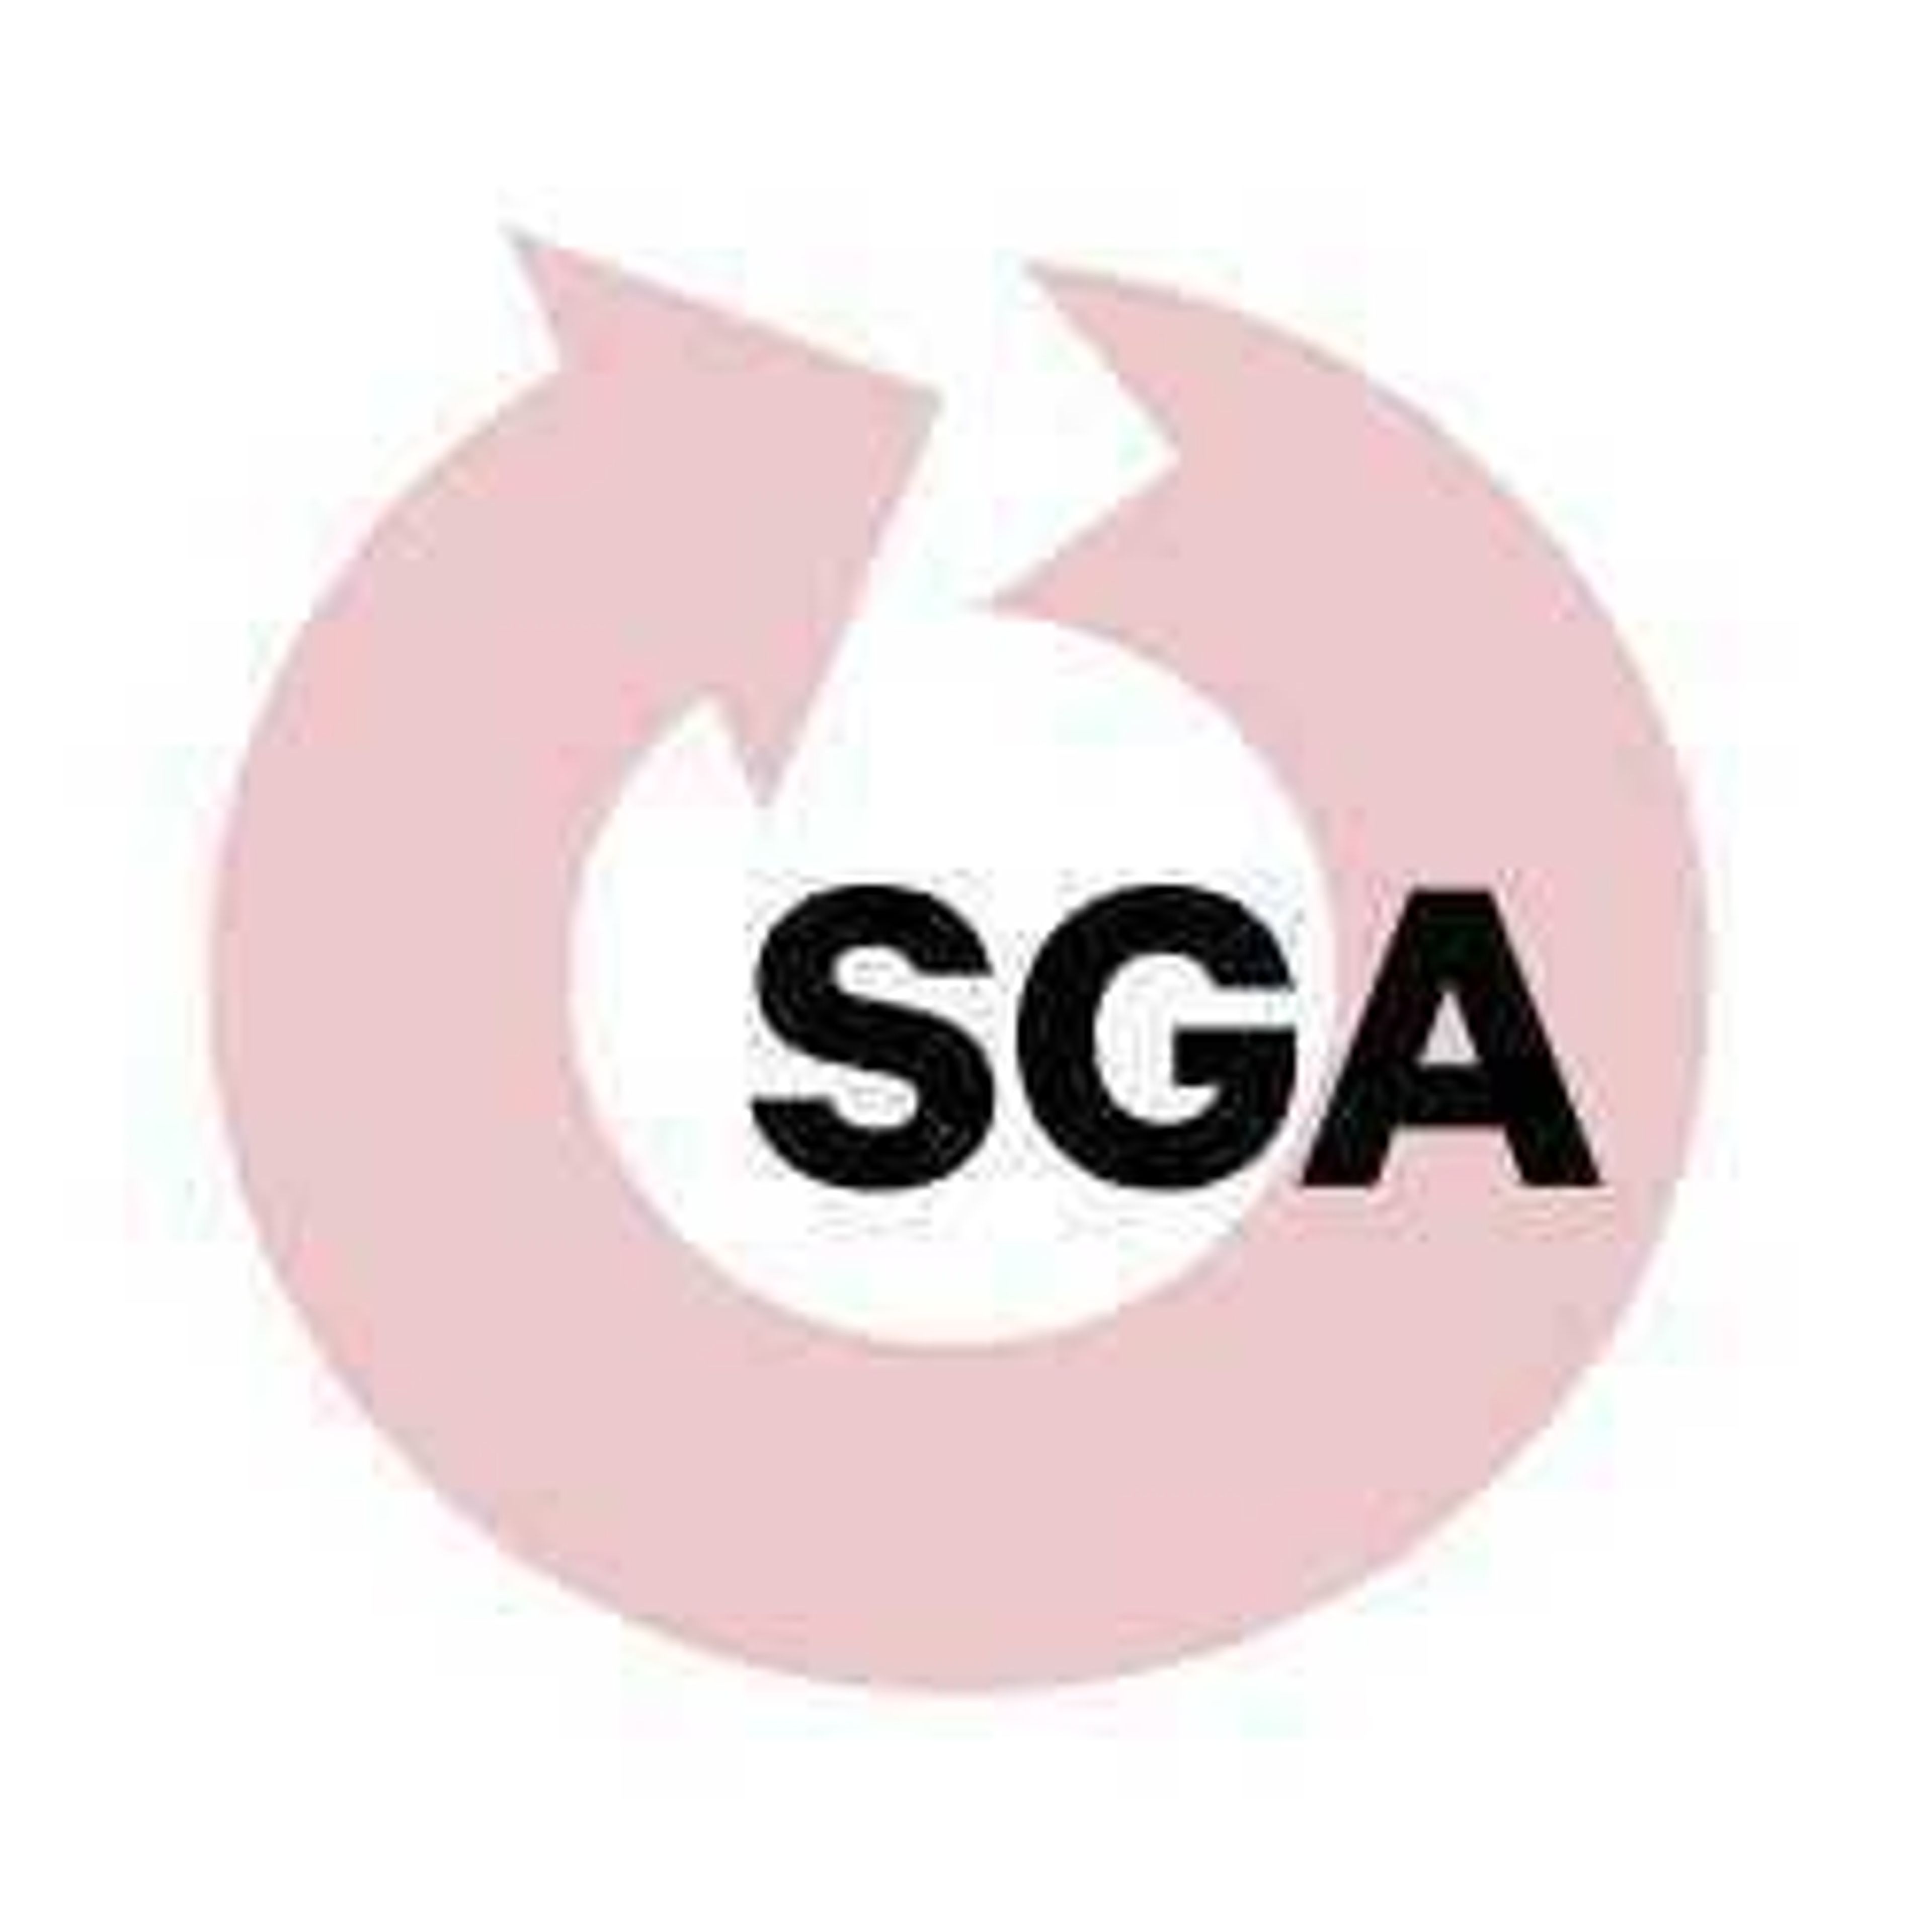 SGA members share concerns on student evaluations